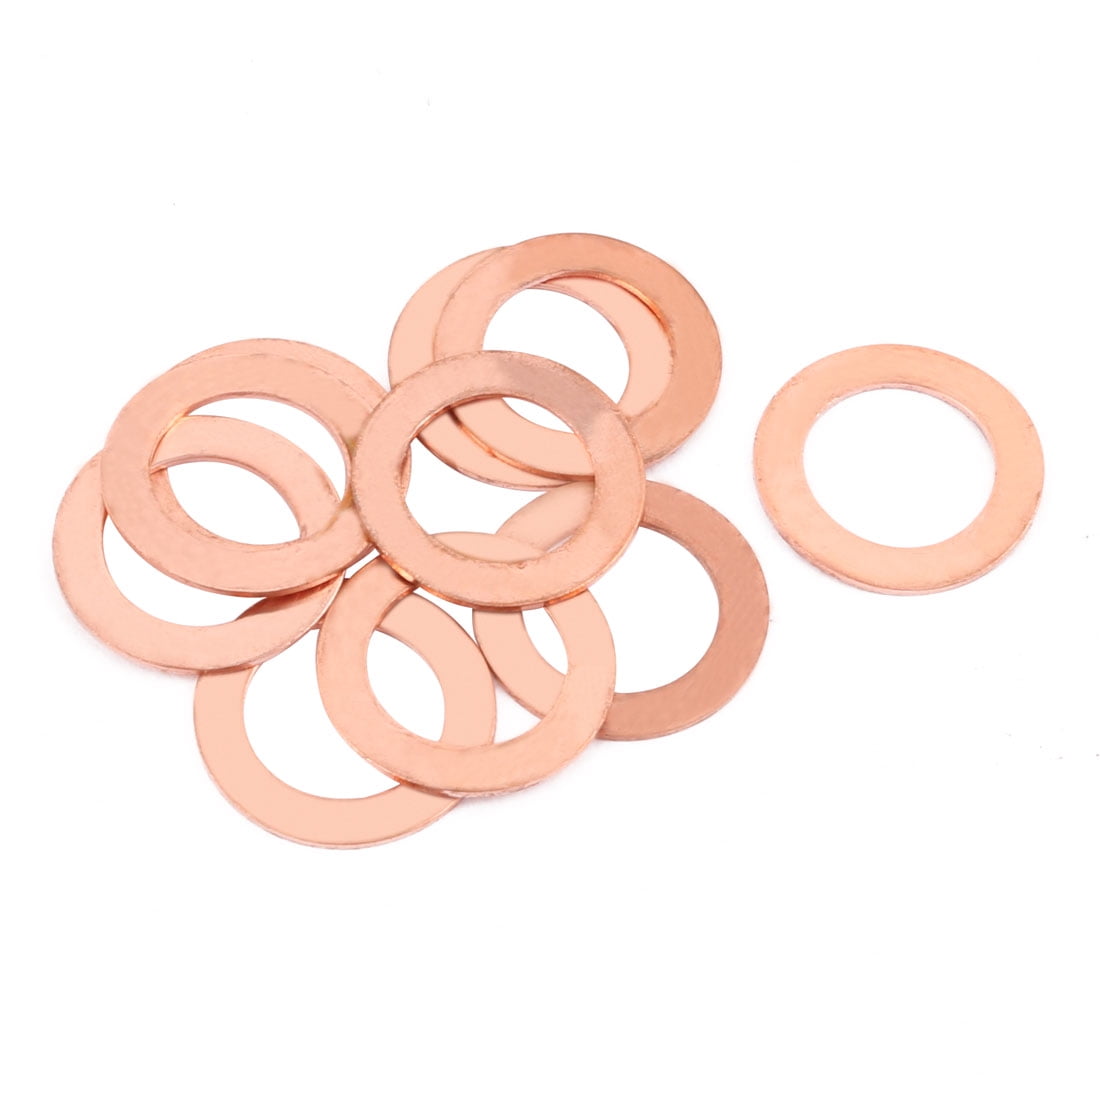 Copper Washers 10mm x 14mm x 1mm Pack of 10 